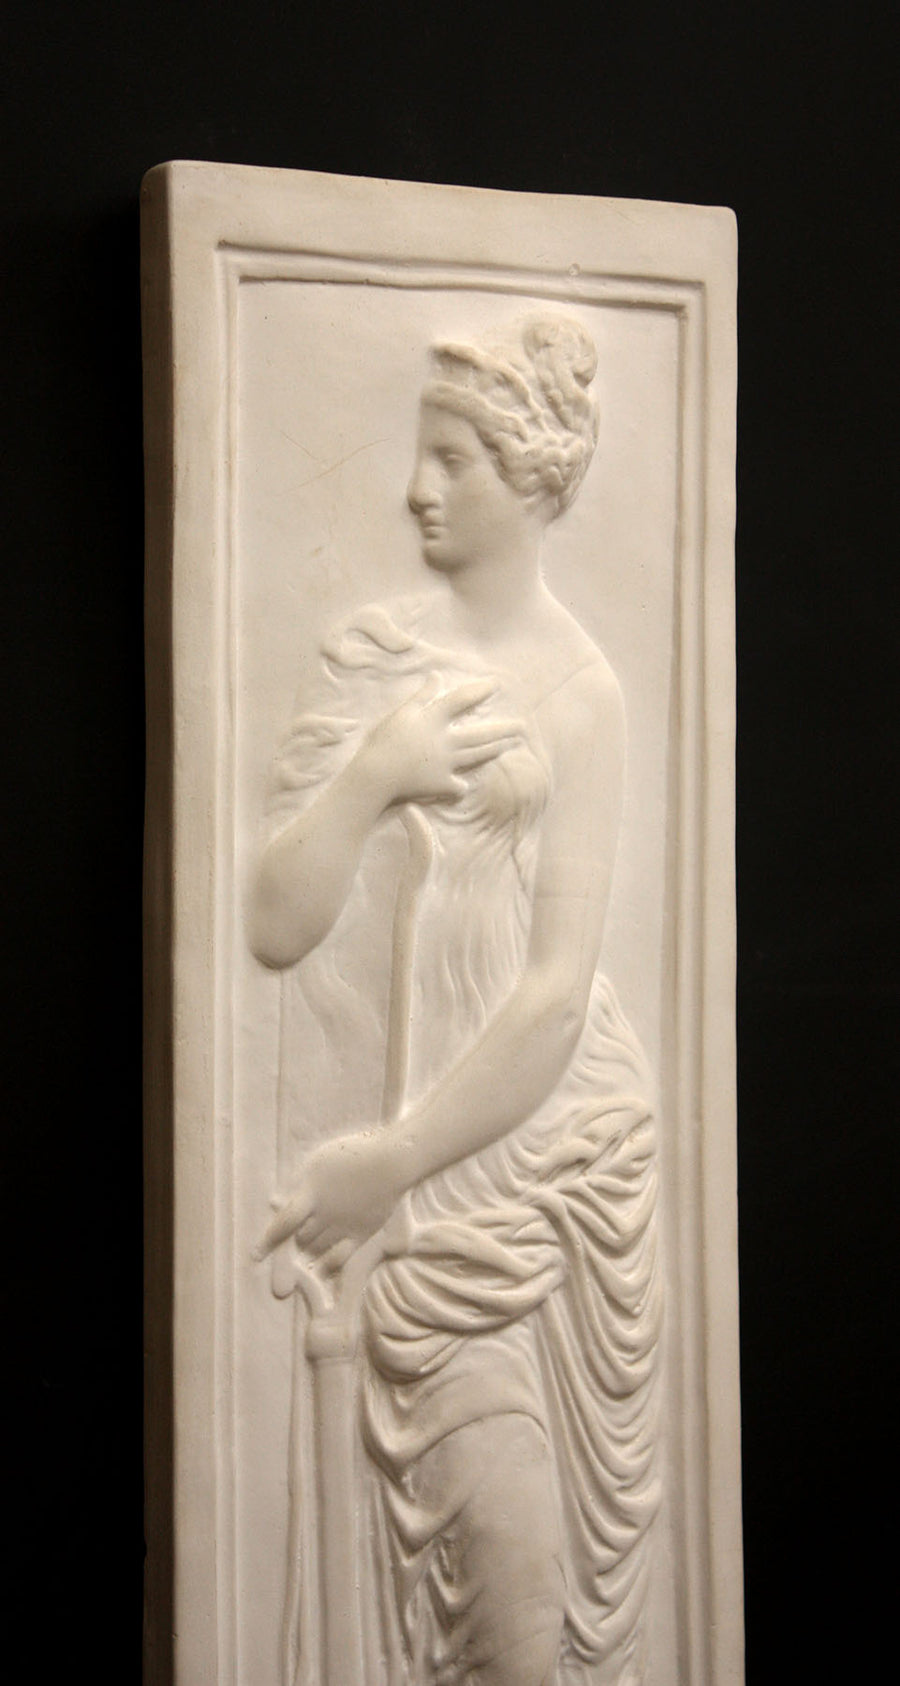 photo of white plaster cast relief sculpture of female figure in drapery